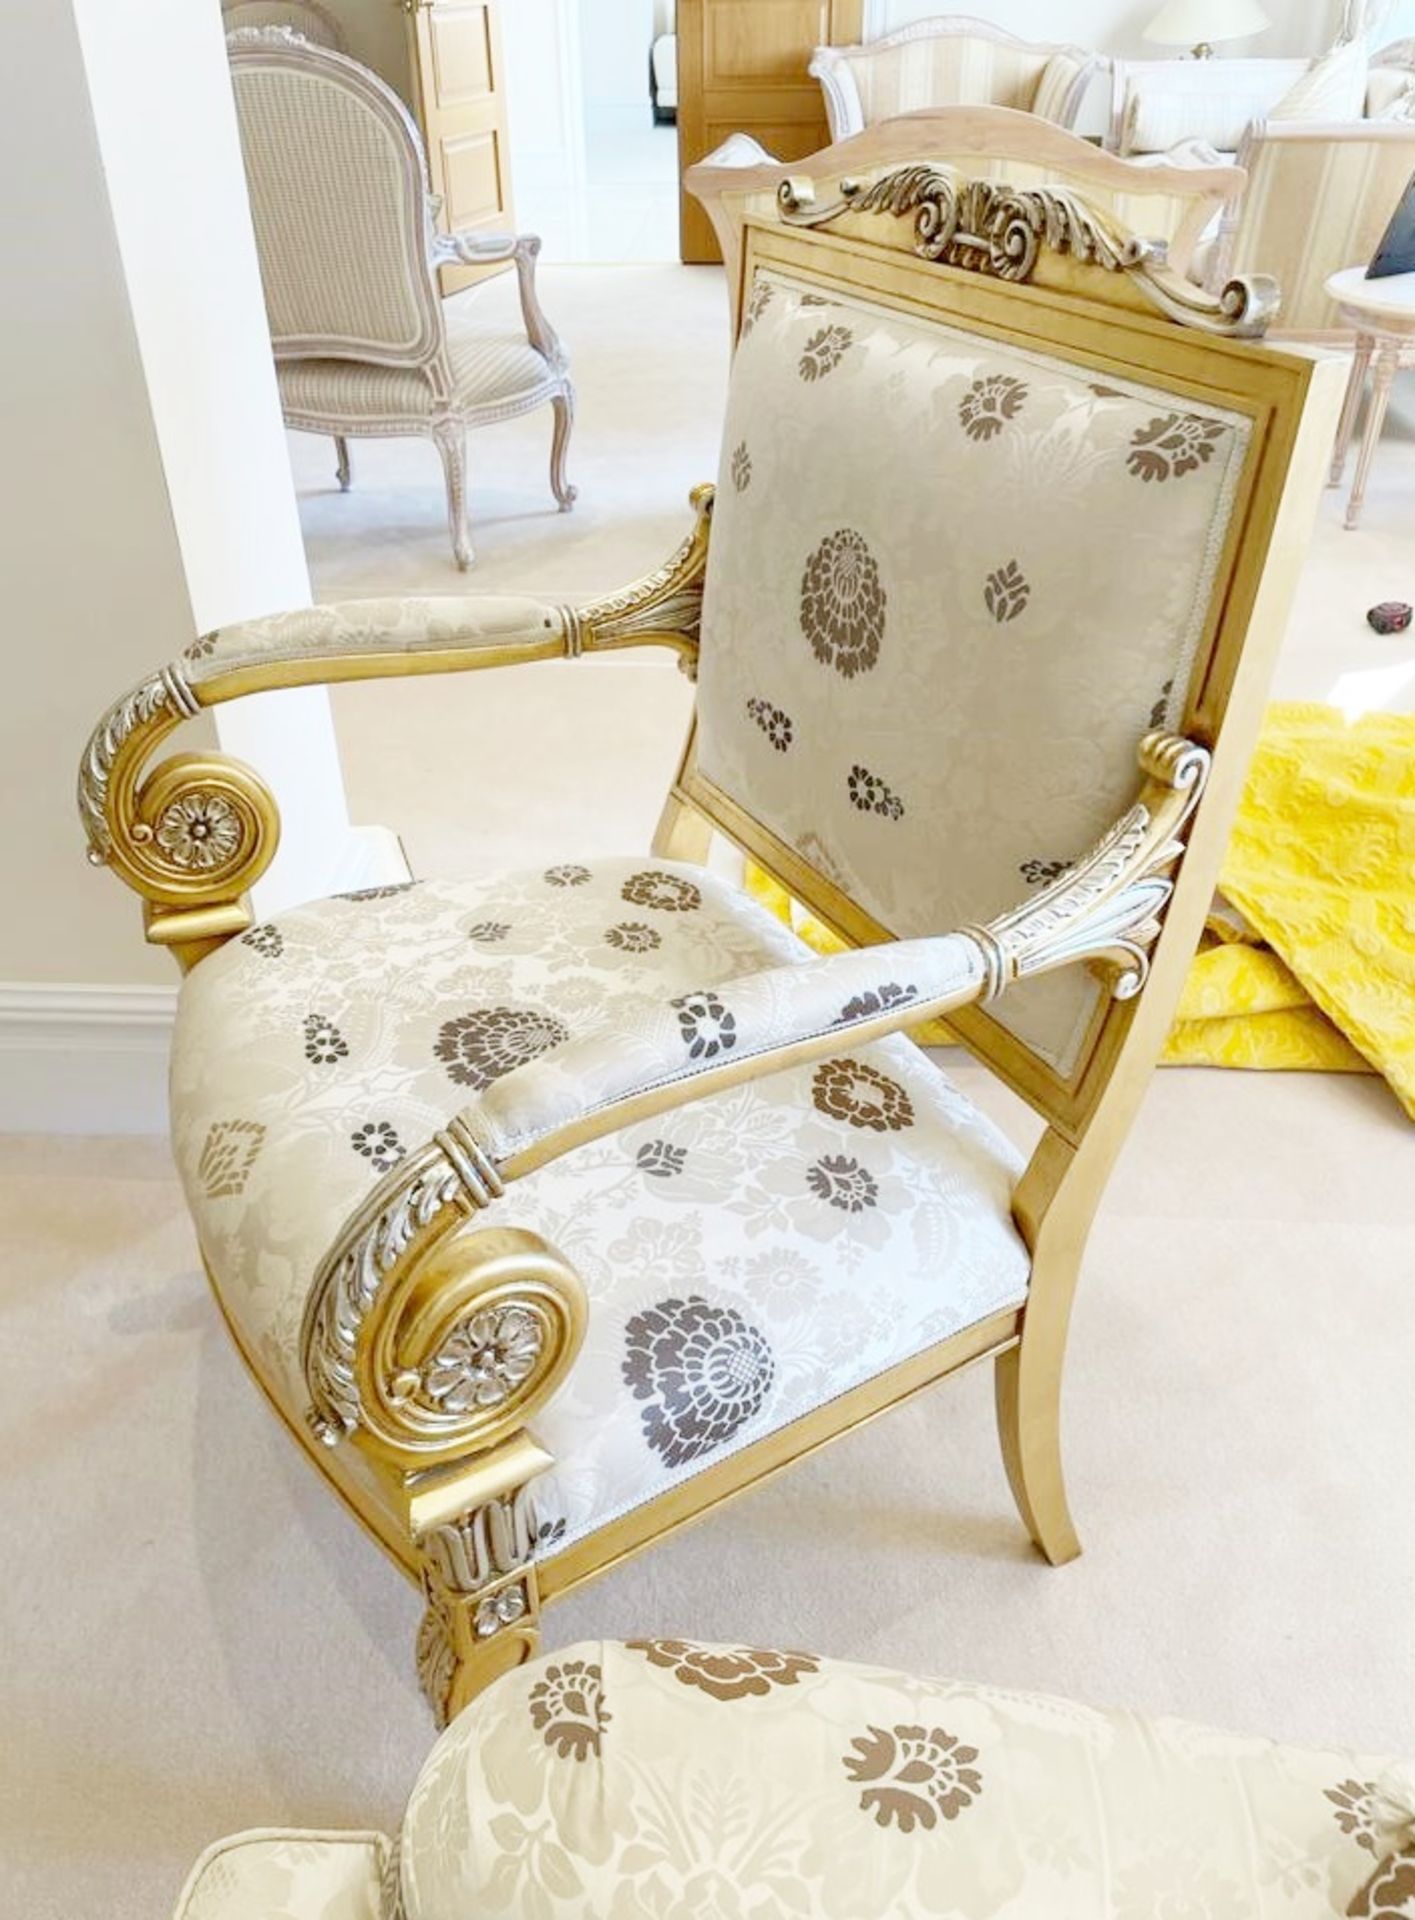 Pair of Scroll Arm Side Chair With Beautiful Carving and Bespoke Upholstery - Size: H105/46 x W75  x - Image 19 of 25